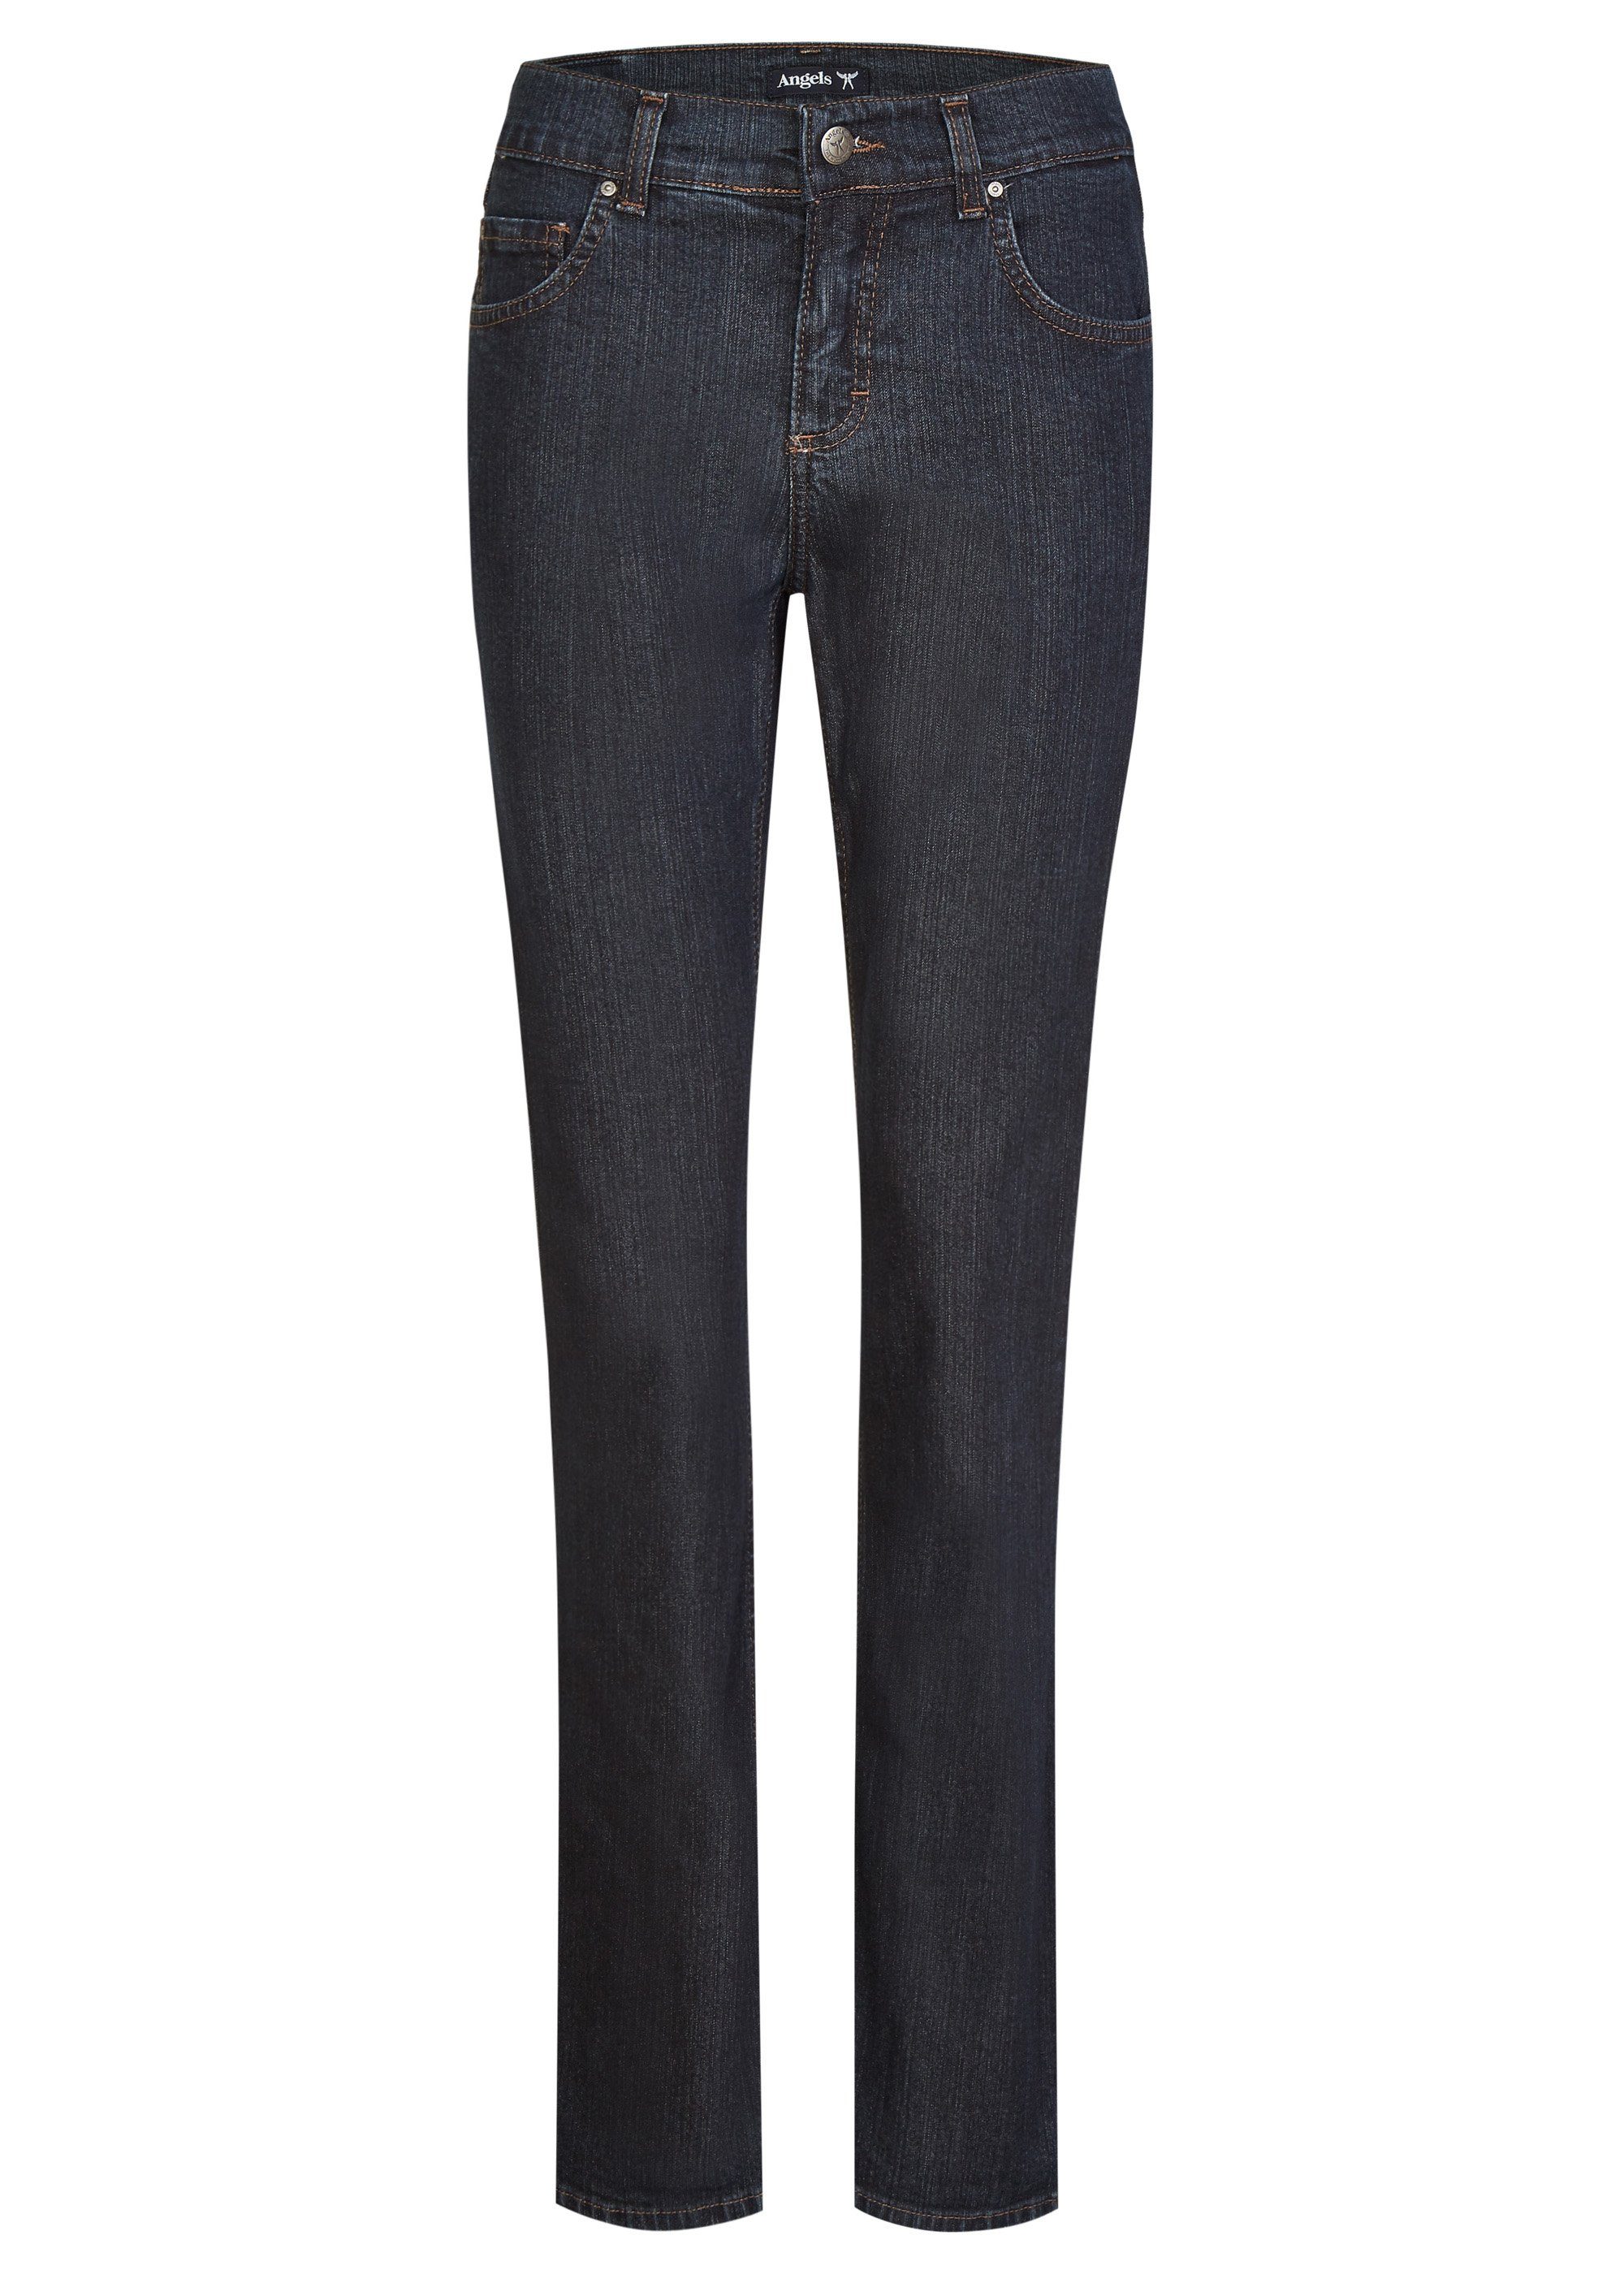 53 JEANS LUCI 90.30 blue Stretch-Jeans ANGELS ANGELS night